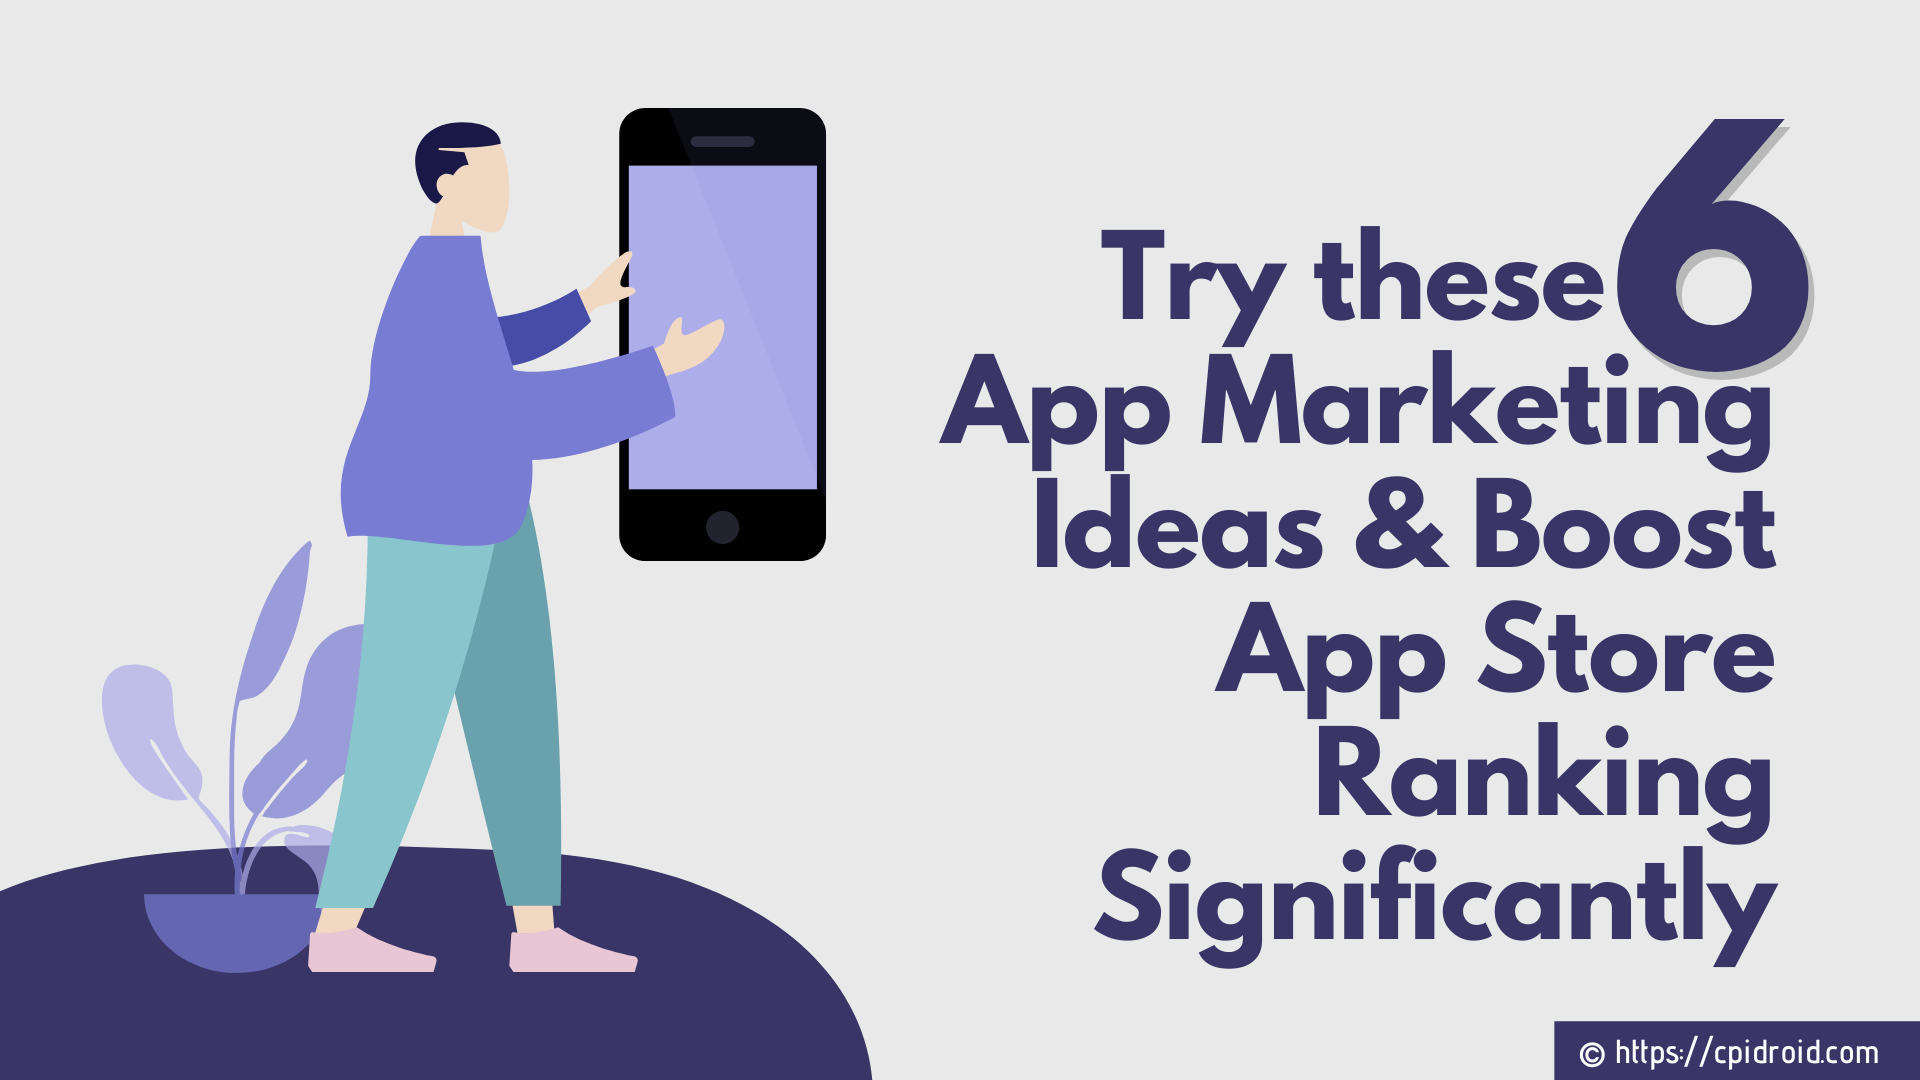 Try these 6 App Marketing Ideas & Boost App Store Ranking Significantly